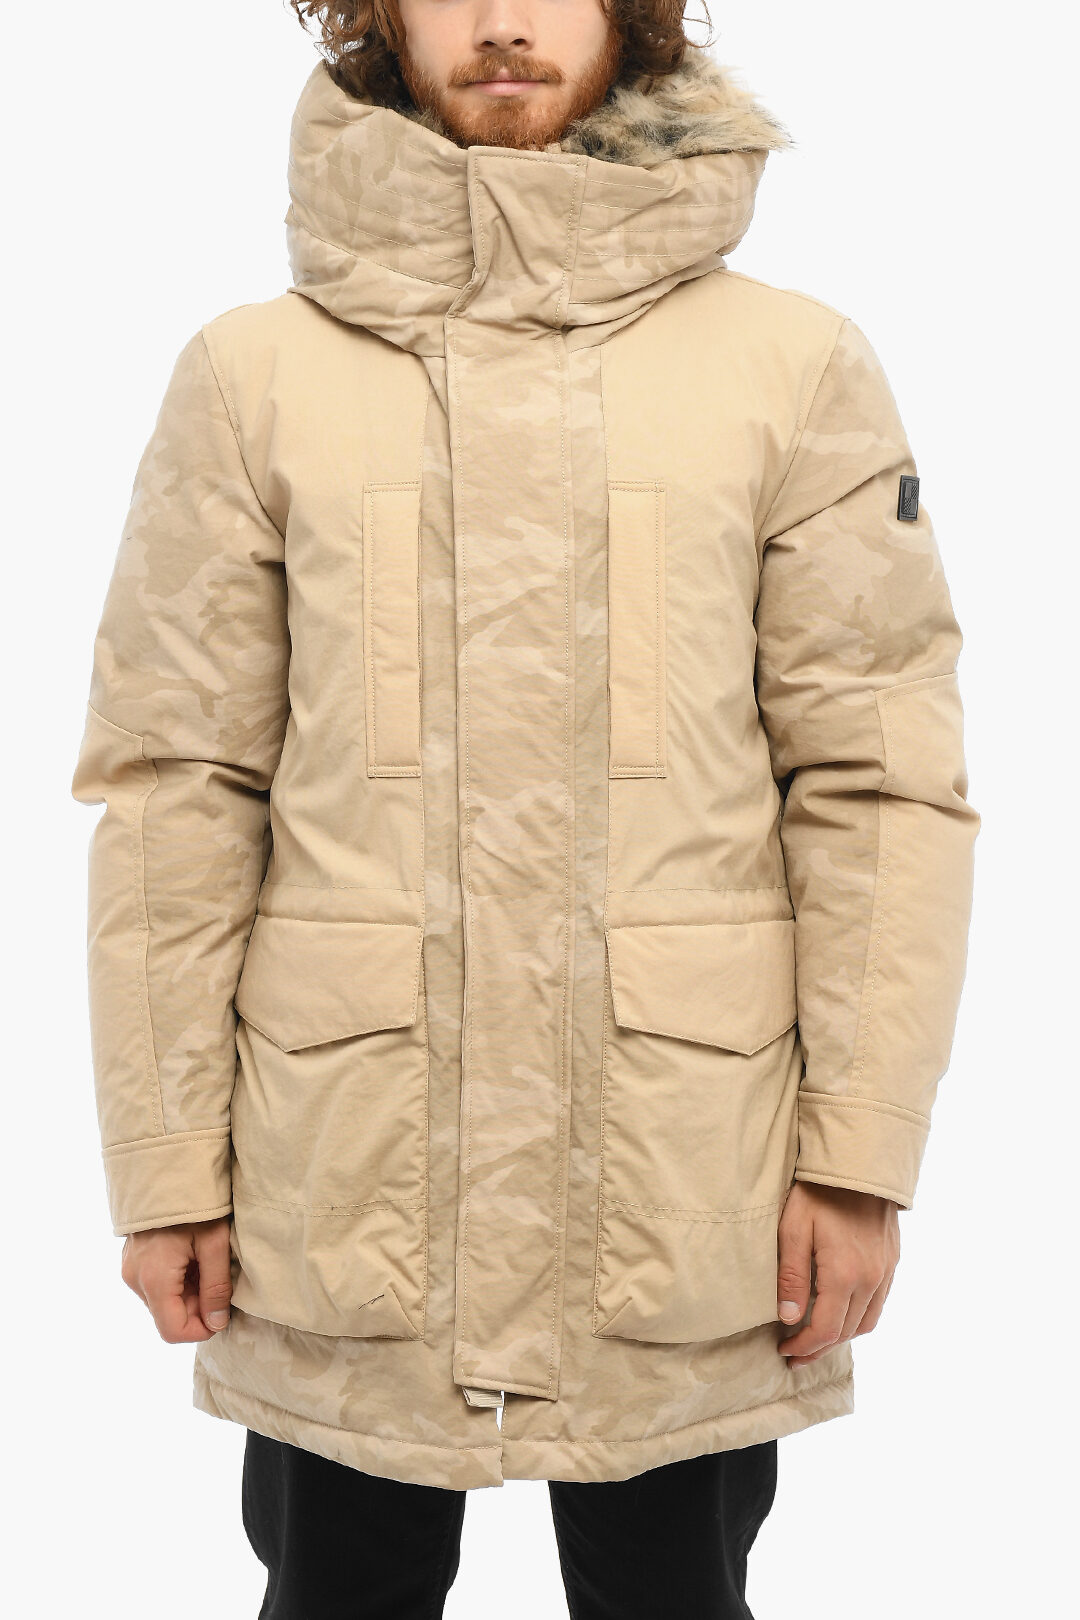 Woolrich Solid Color Down Jacket with Camouflage Details men